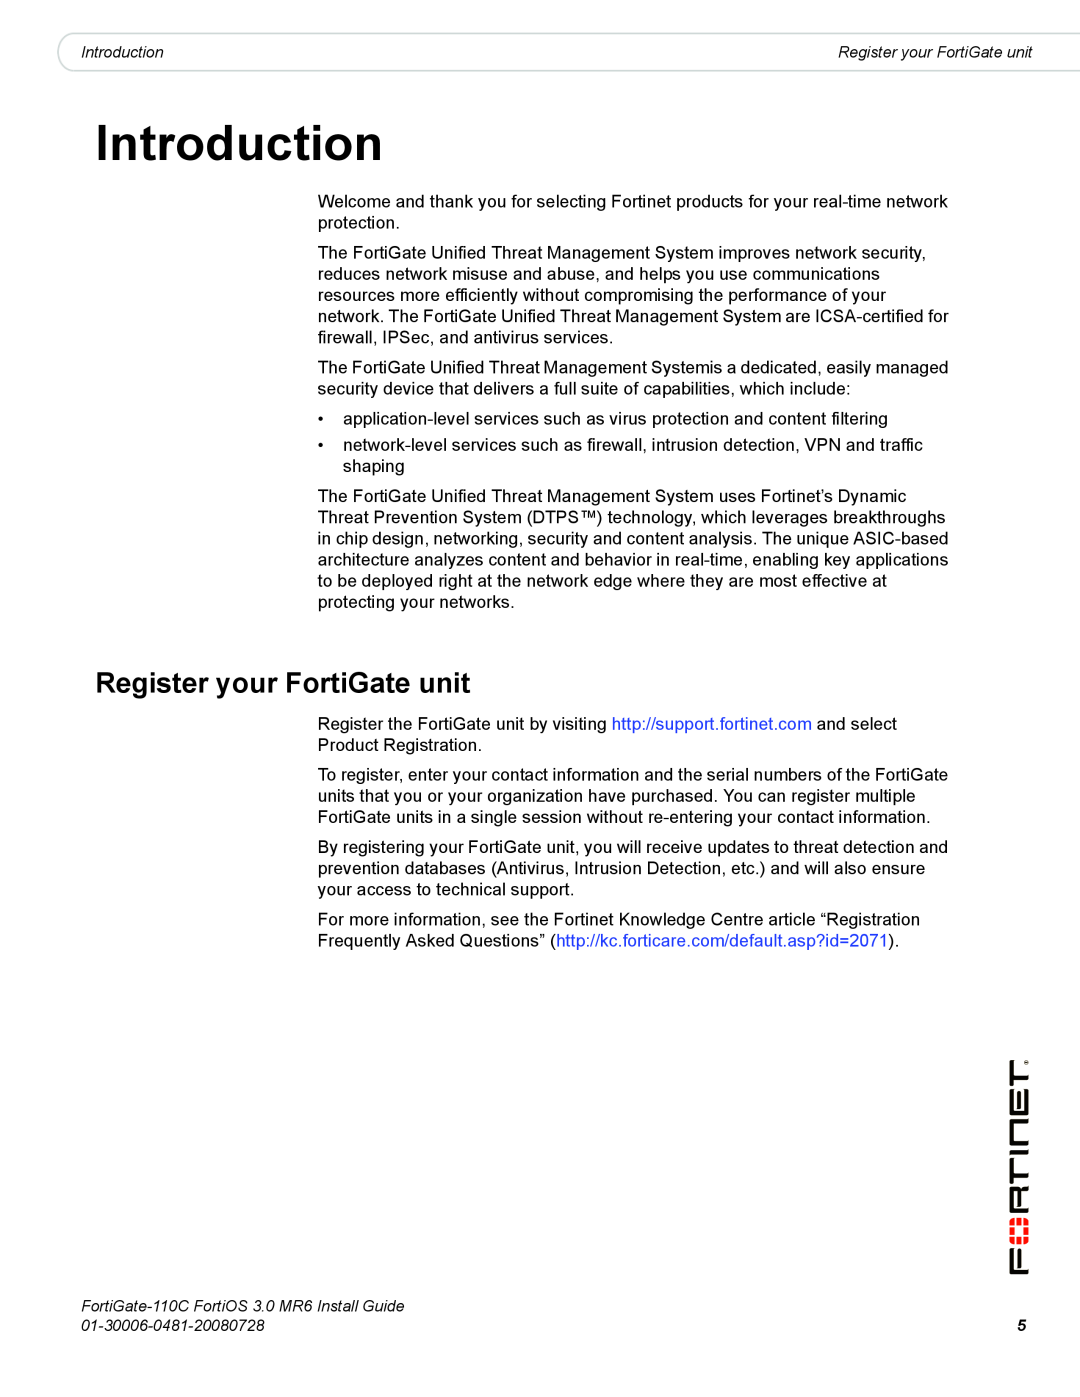 Fortinet 110C manual Introduction, Register your FortiGate unit 